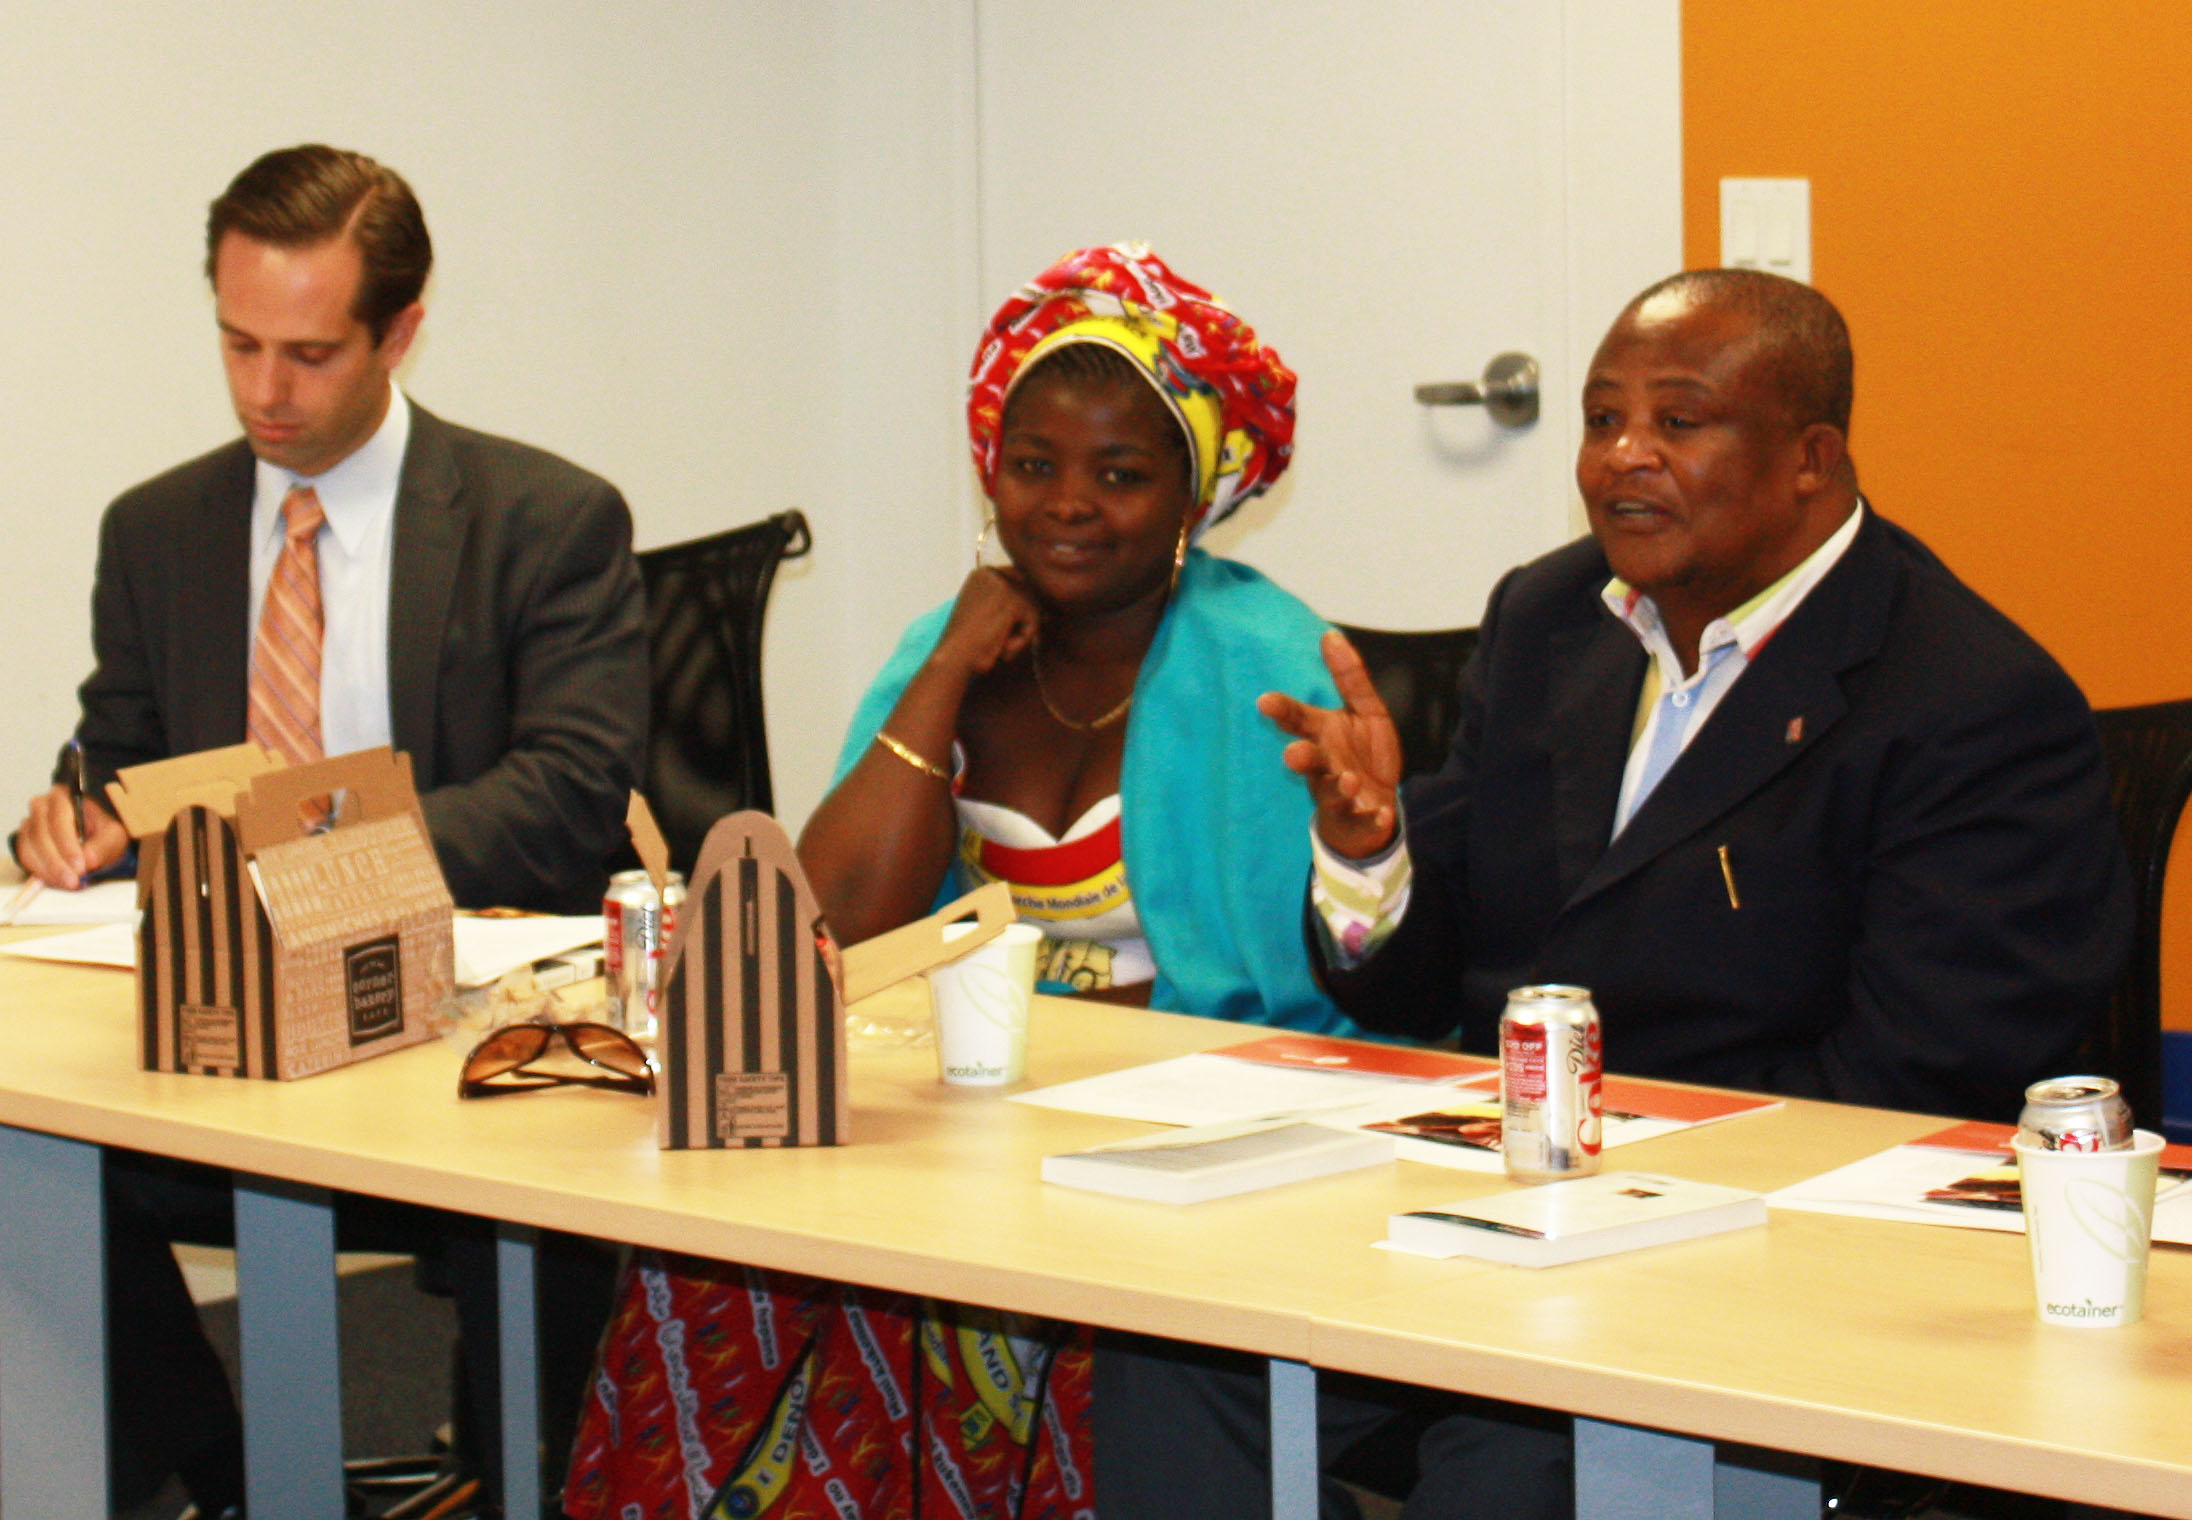 Congolese Activists Bring a Local Perspective to D.C.